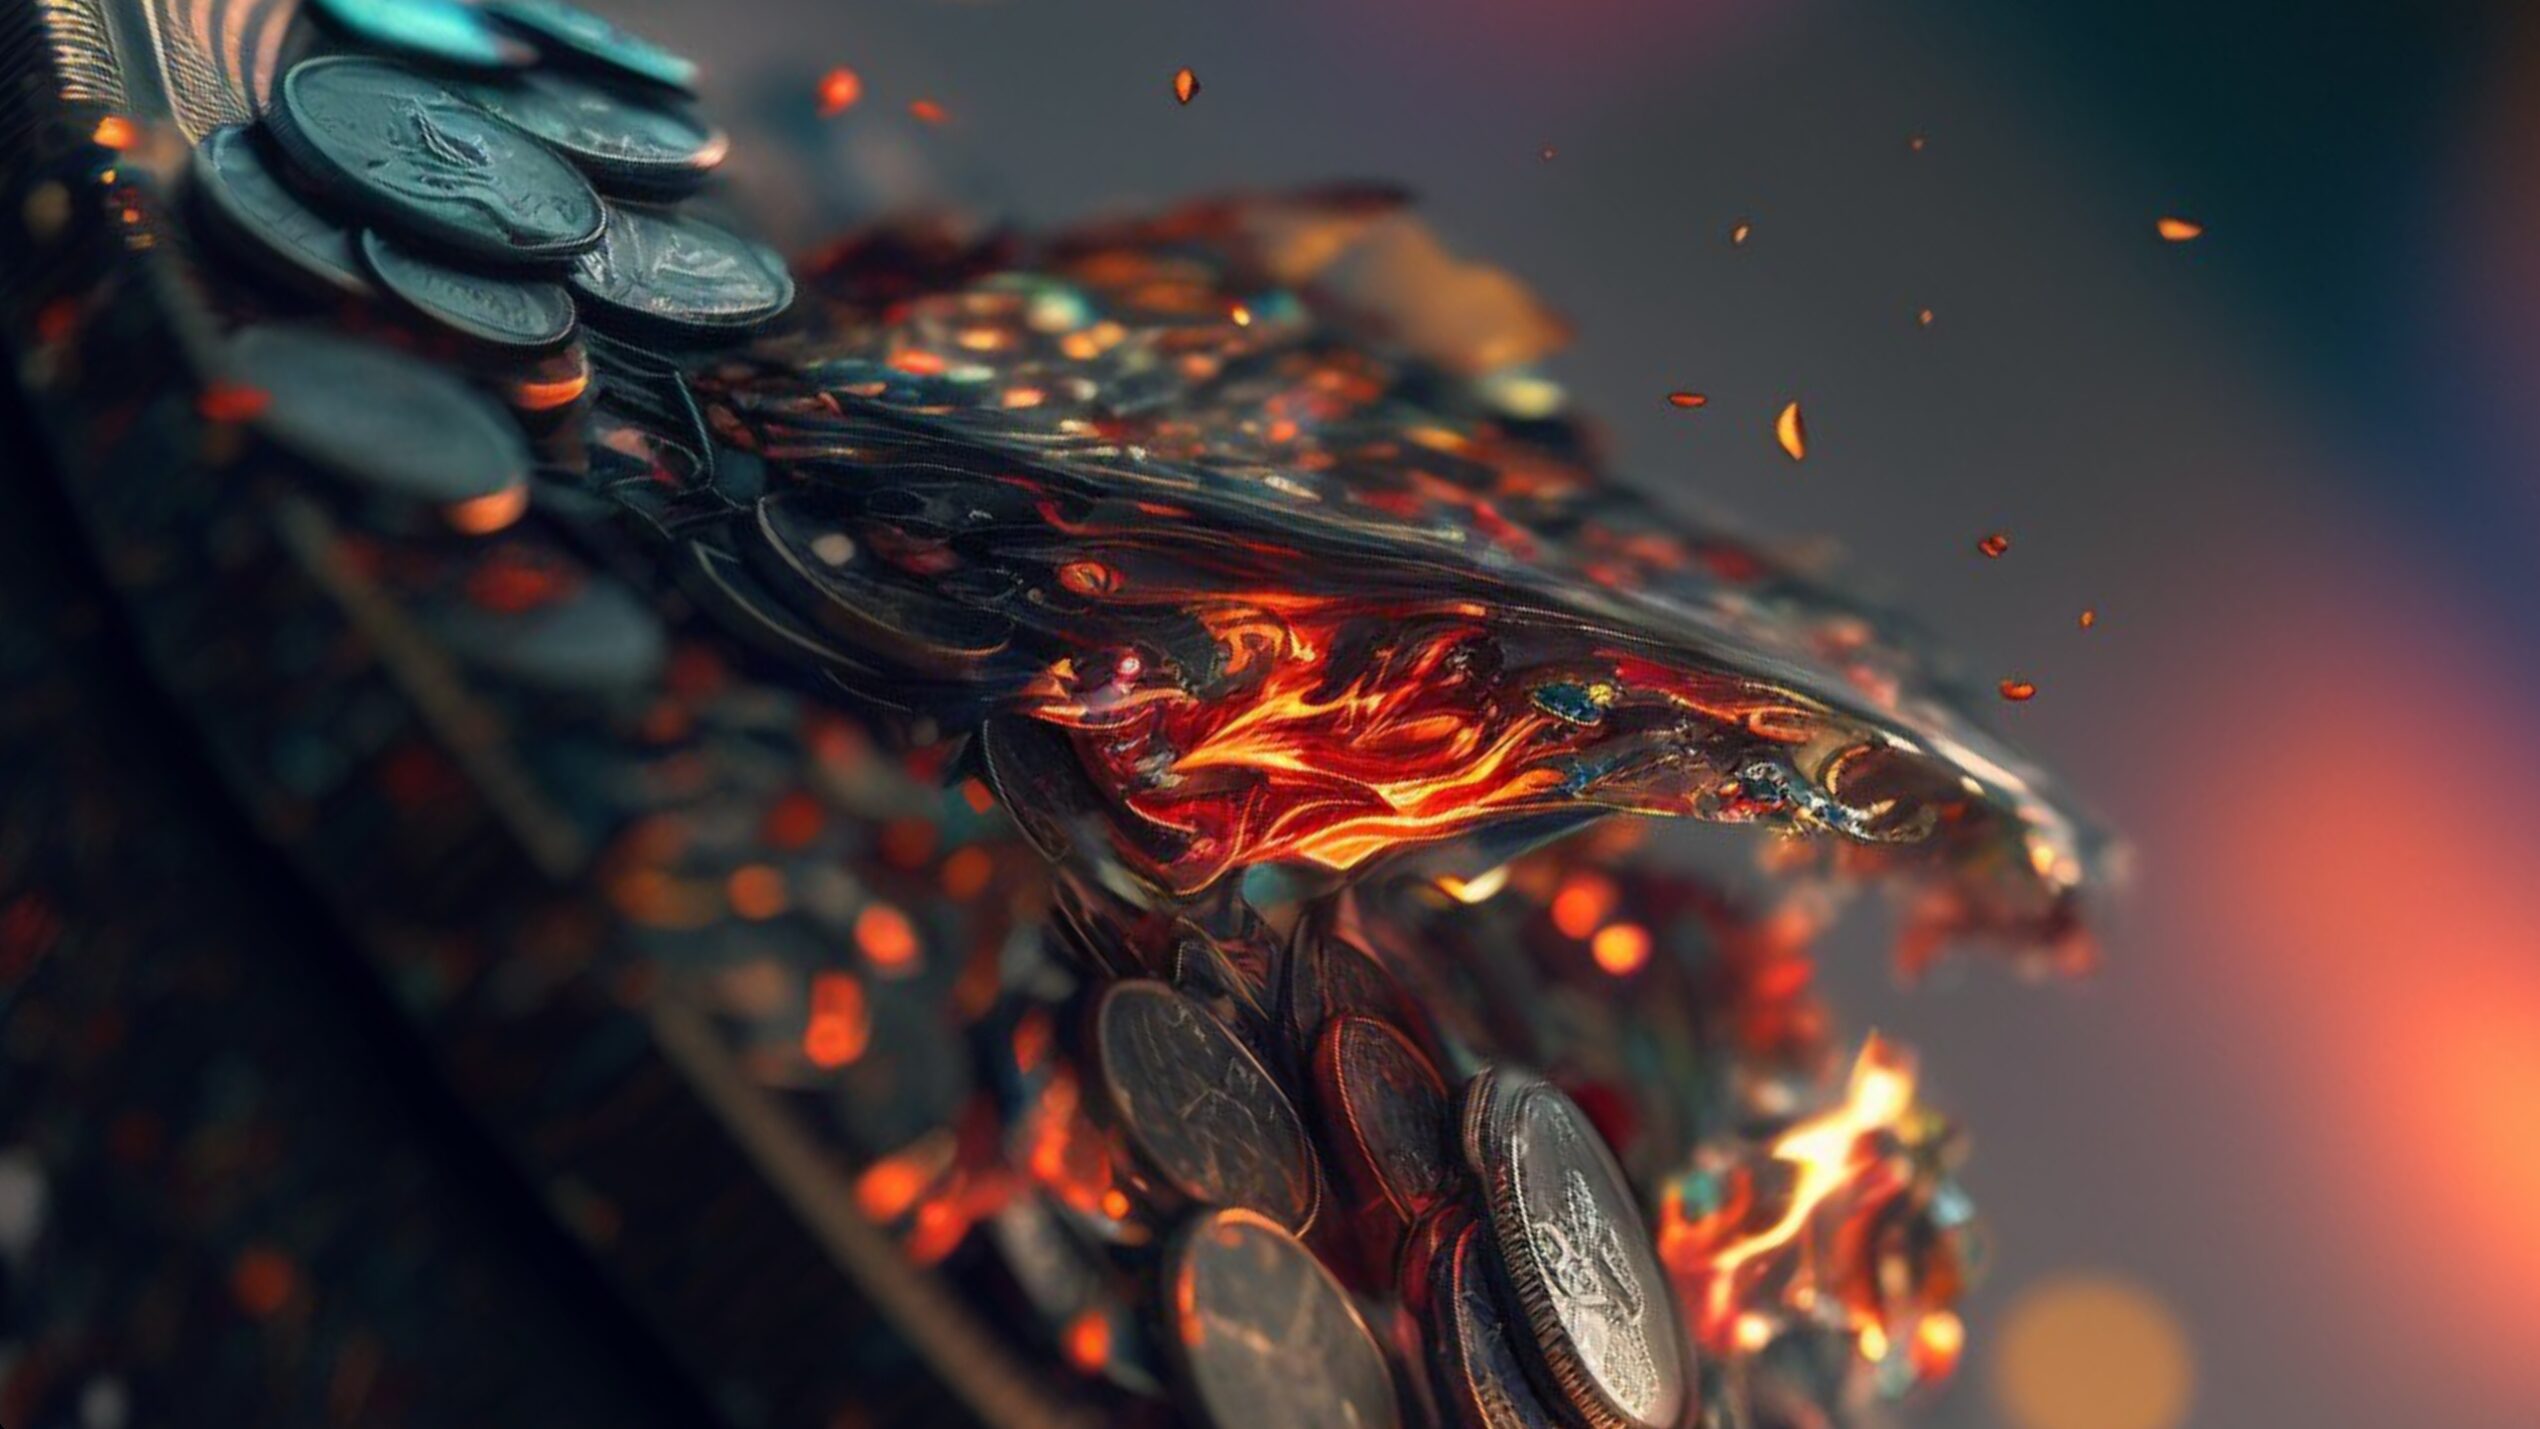 Metaverse Tokens Plunge More than 90% in Value in Industry-Wide Bloodbath